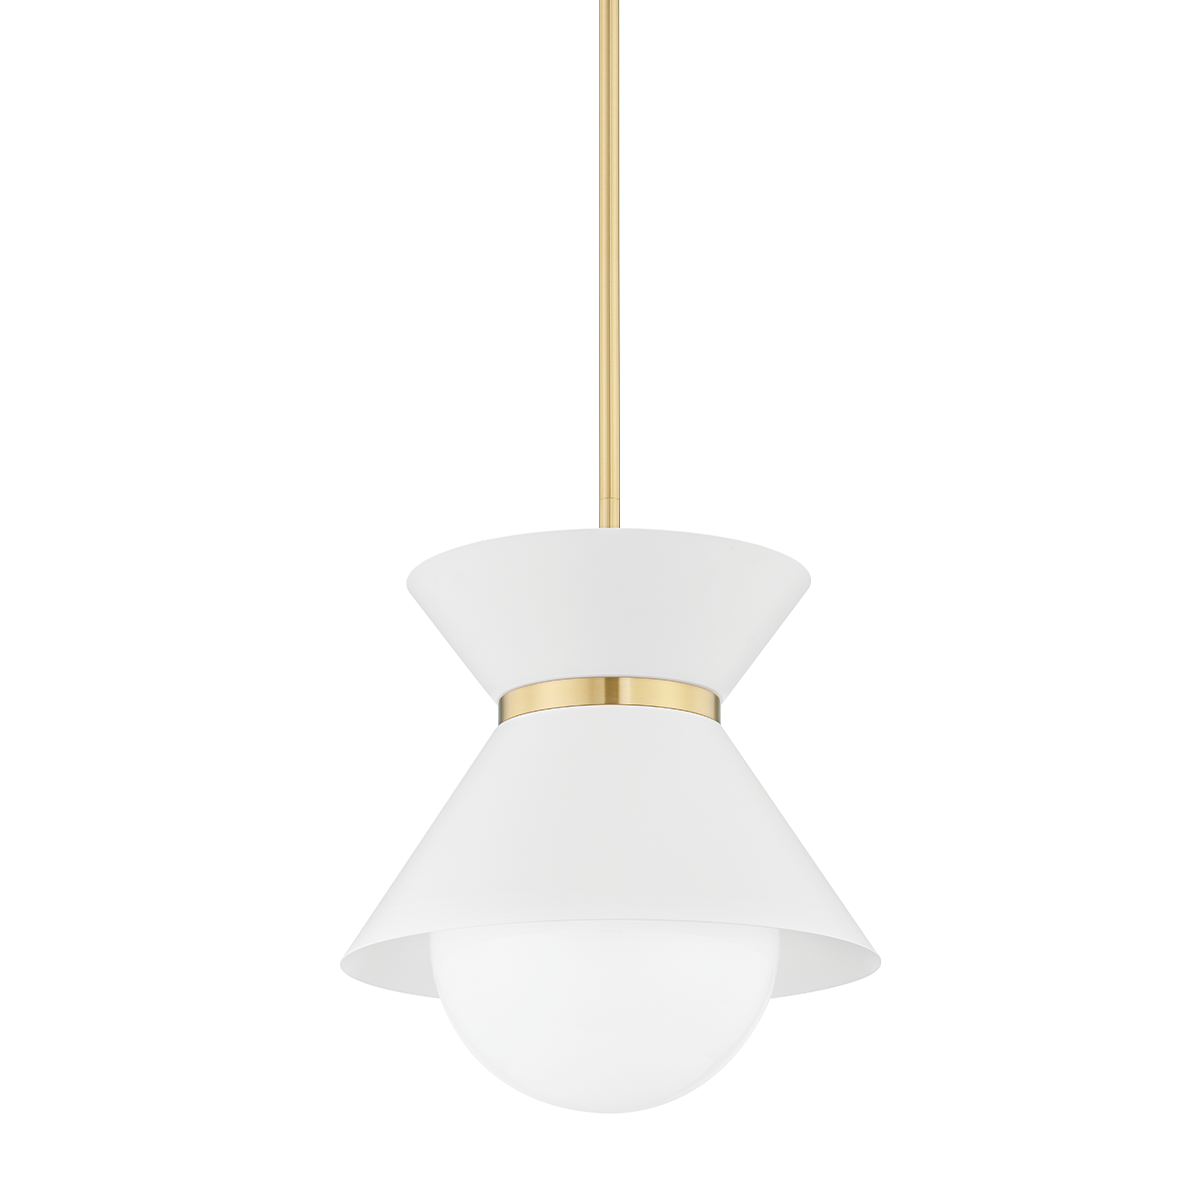 Troy Lighting Scout Pendant